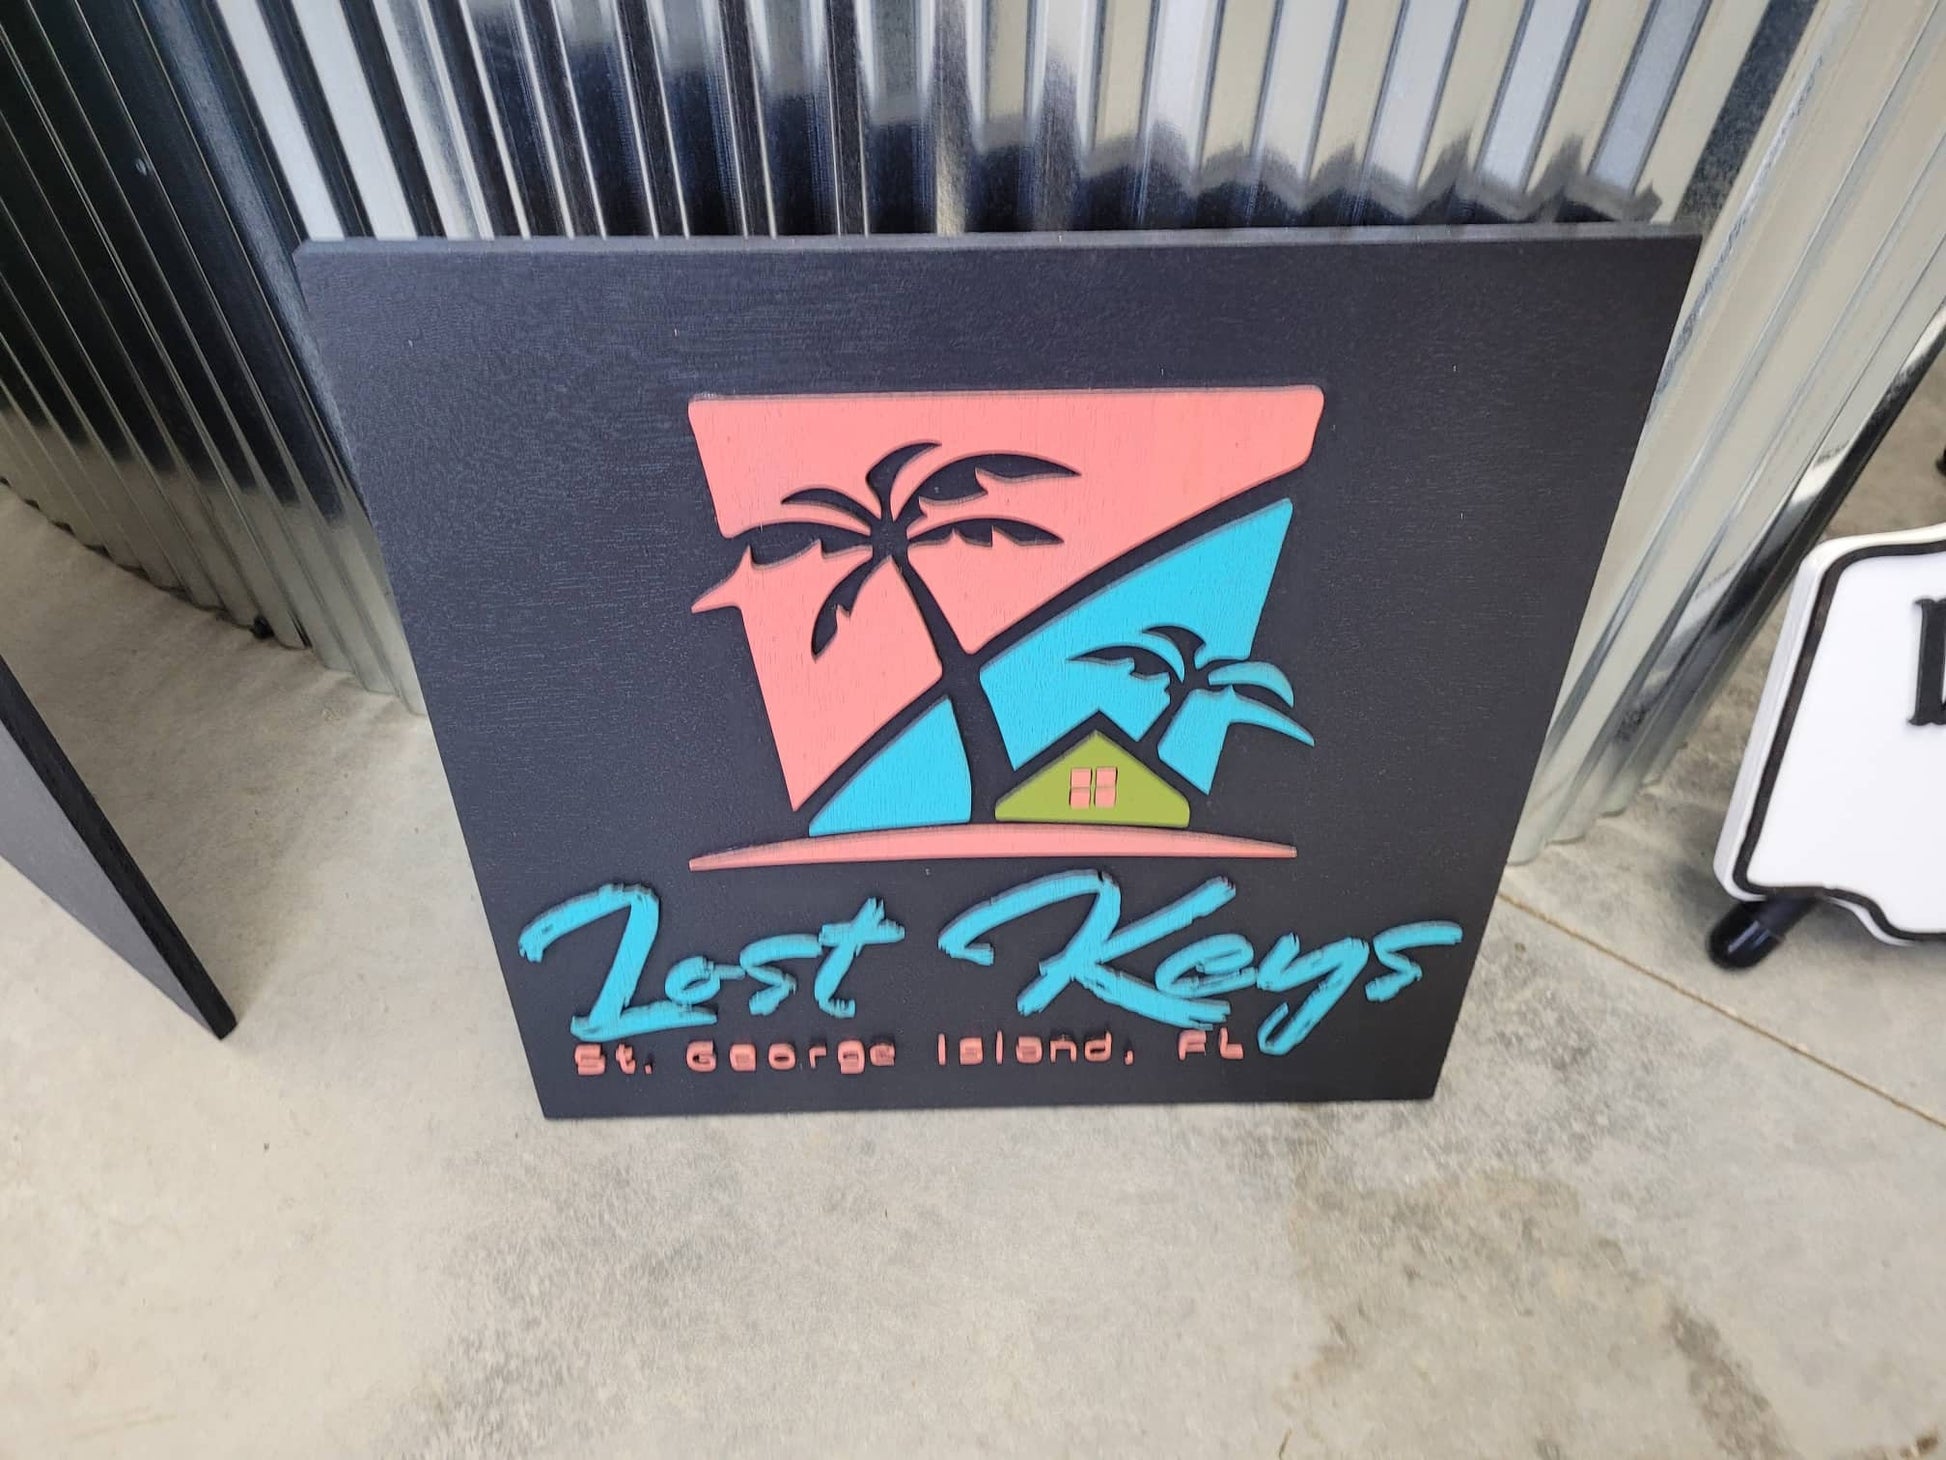 Custom Sign Beach Keys Palm Trees Retro Square Business Commerical Signage 3D Made to Order Co Store Front Small Shop Logo Wooden Handmade